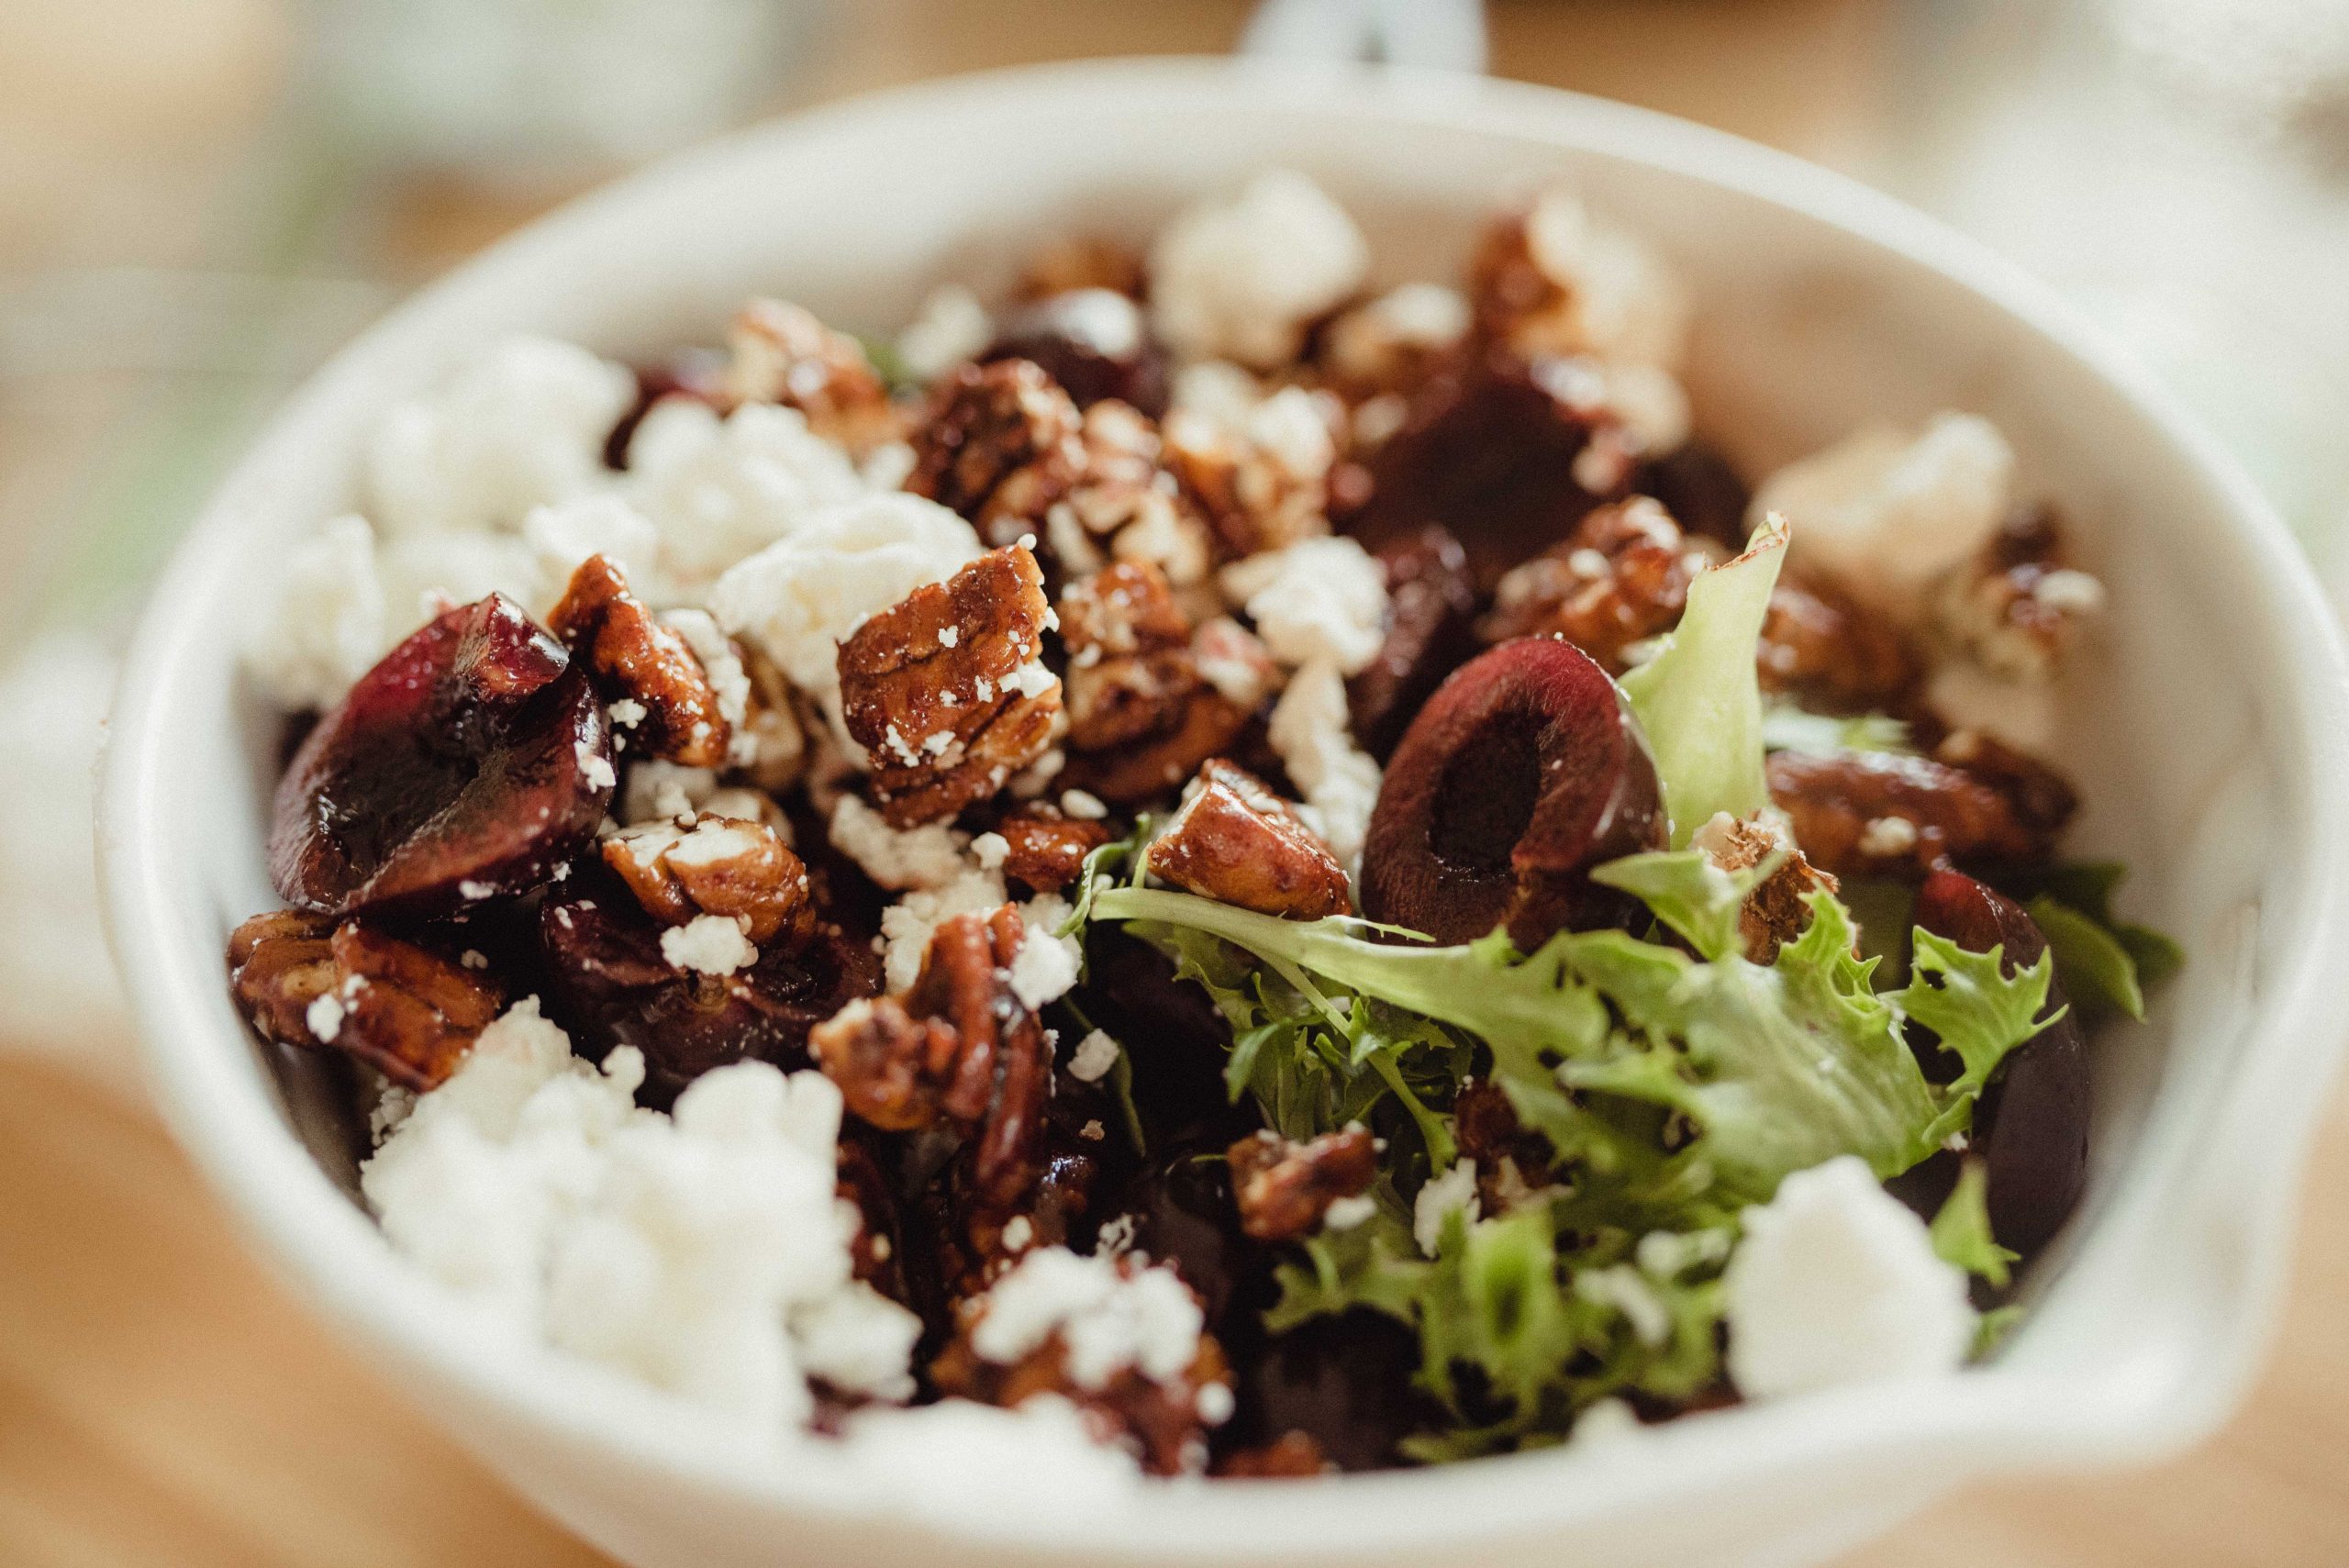 Cherry Goat Cheese Salad with Candied Maple Pecans